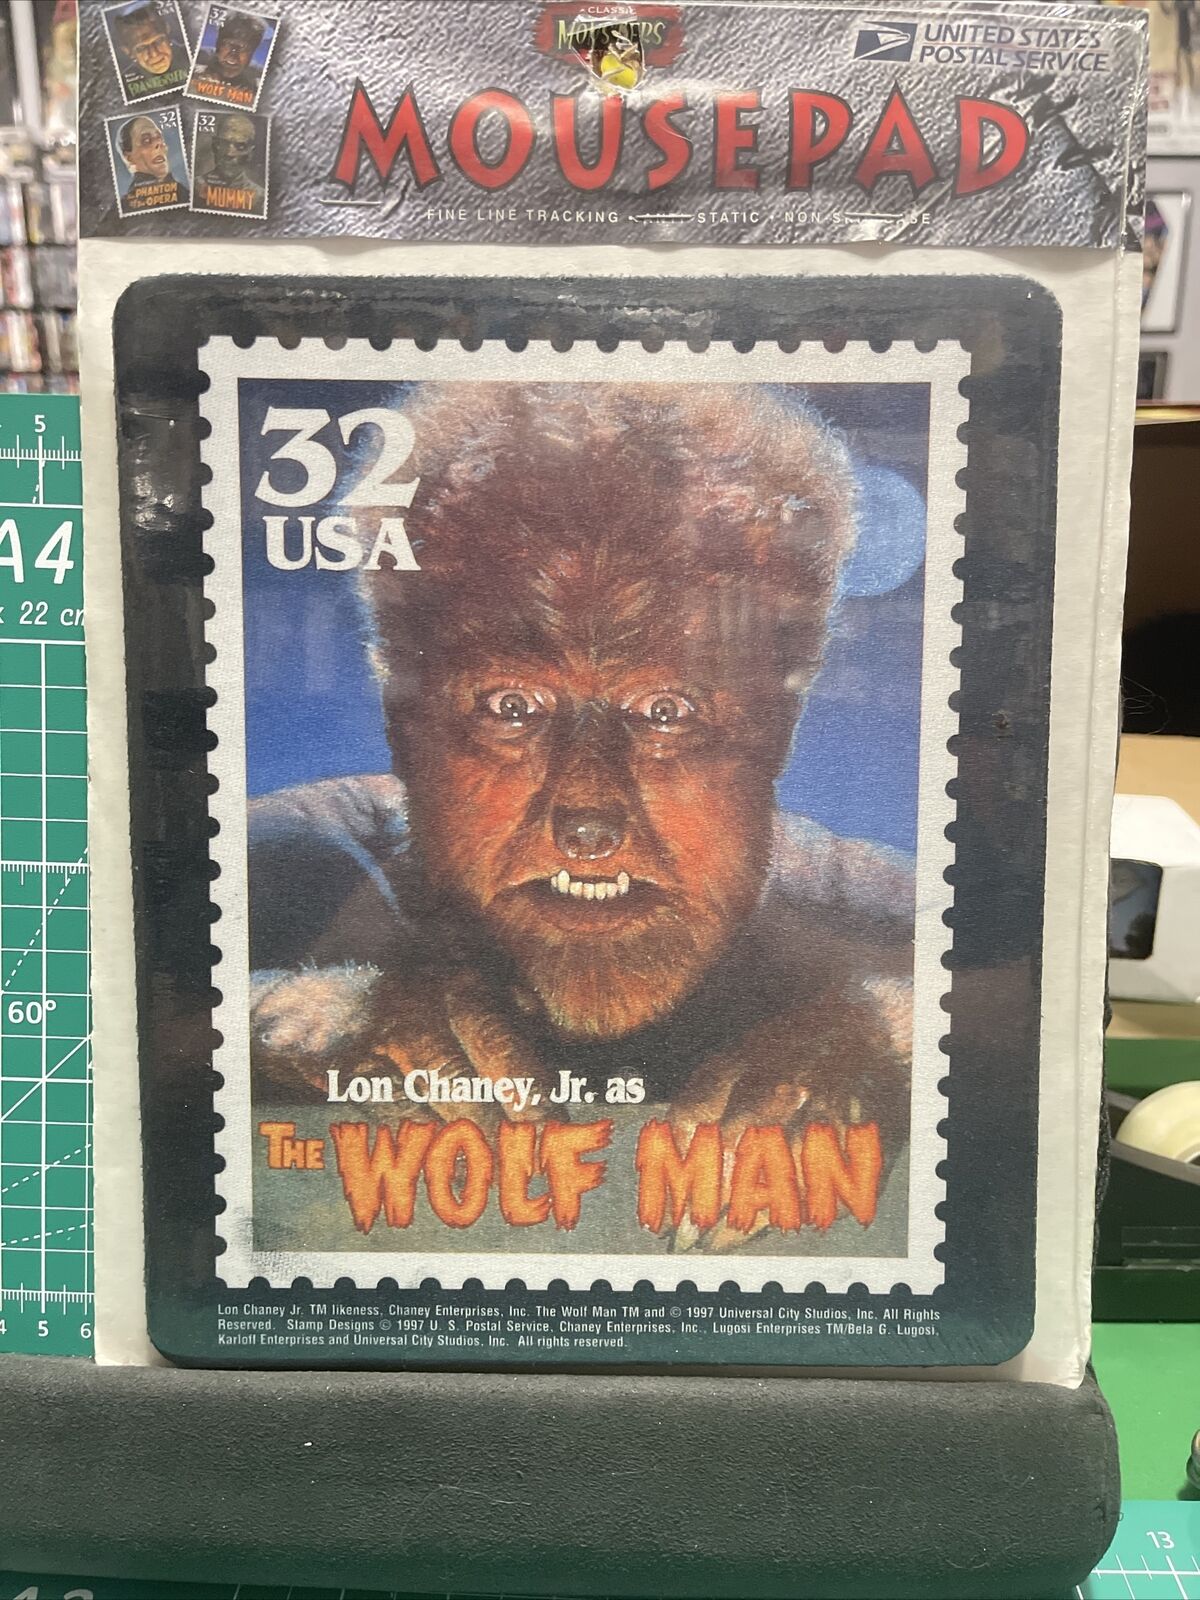 THE WOLFMAN Classic Universal Monsters Stamp Mousepad Lon Chaney Jr. (1997) USPS